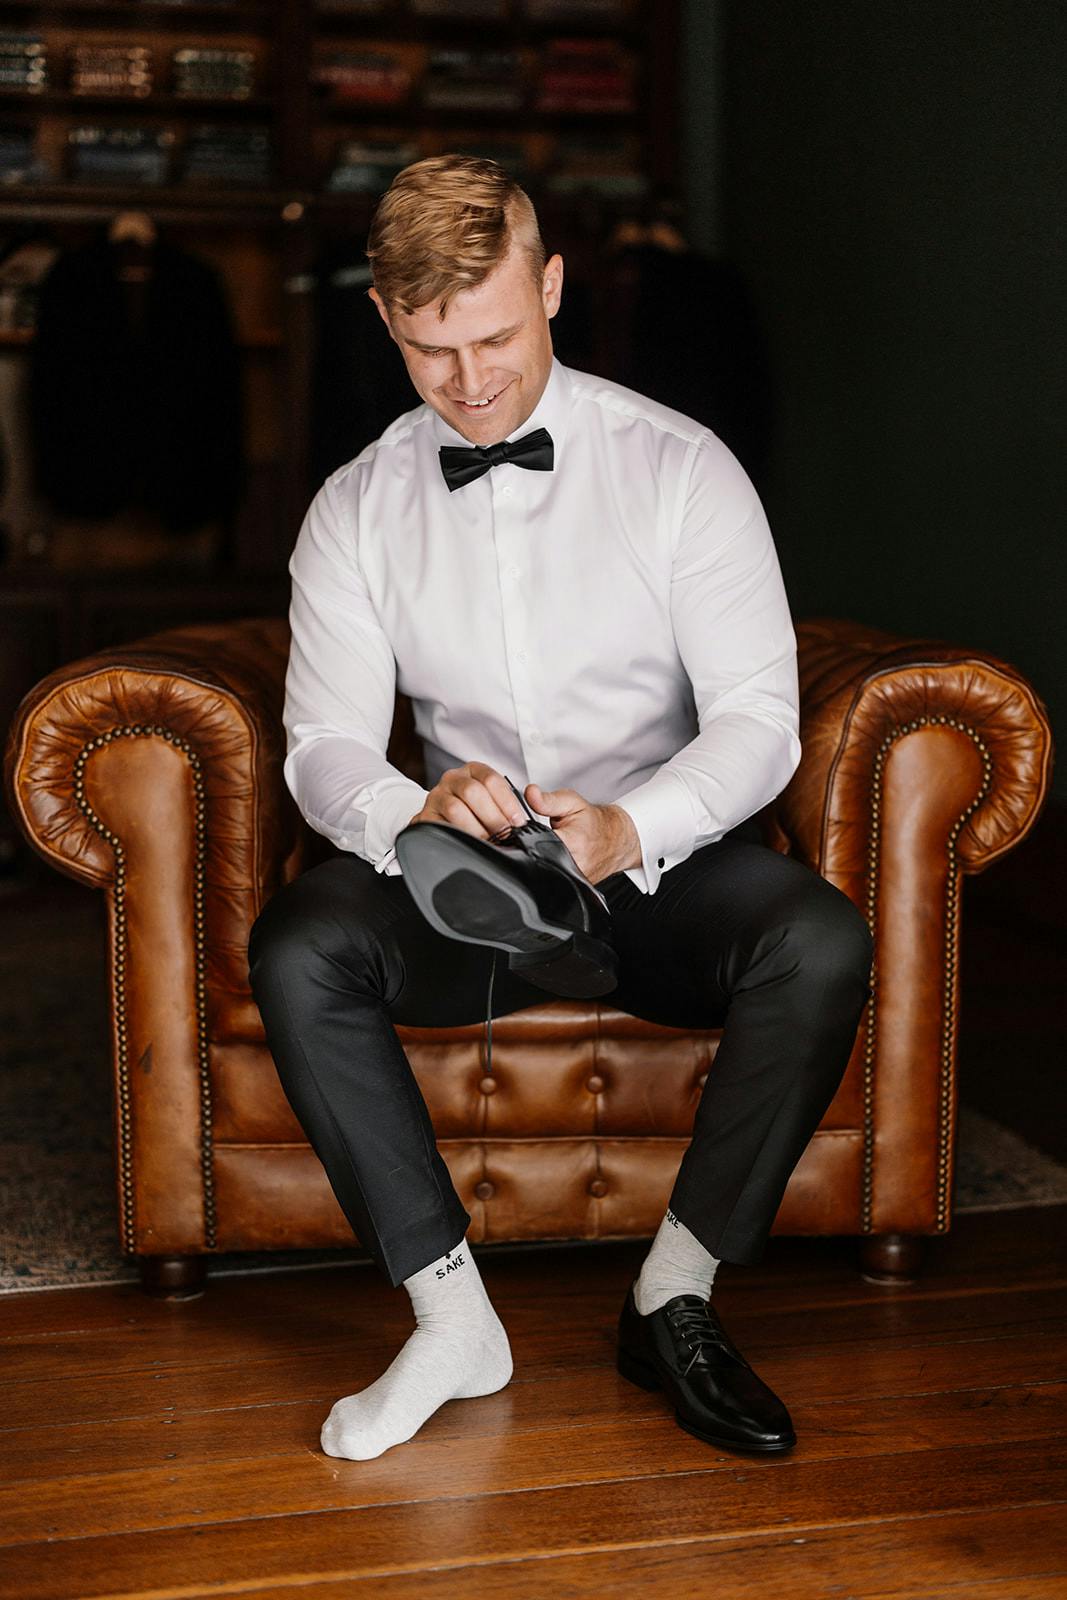 Groom putting on shoes